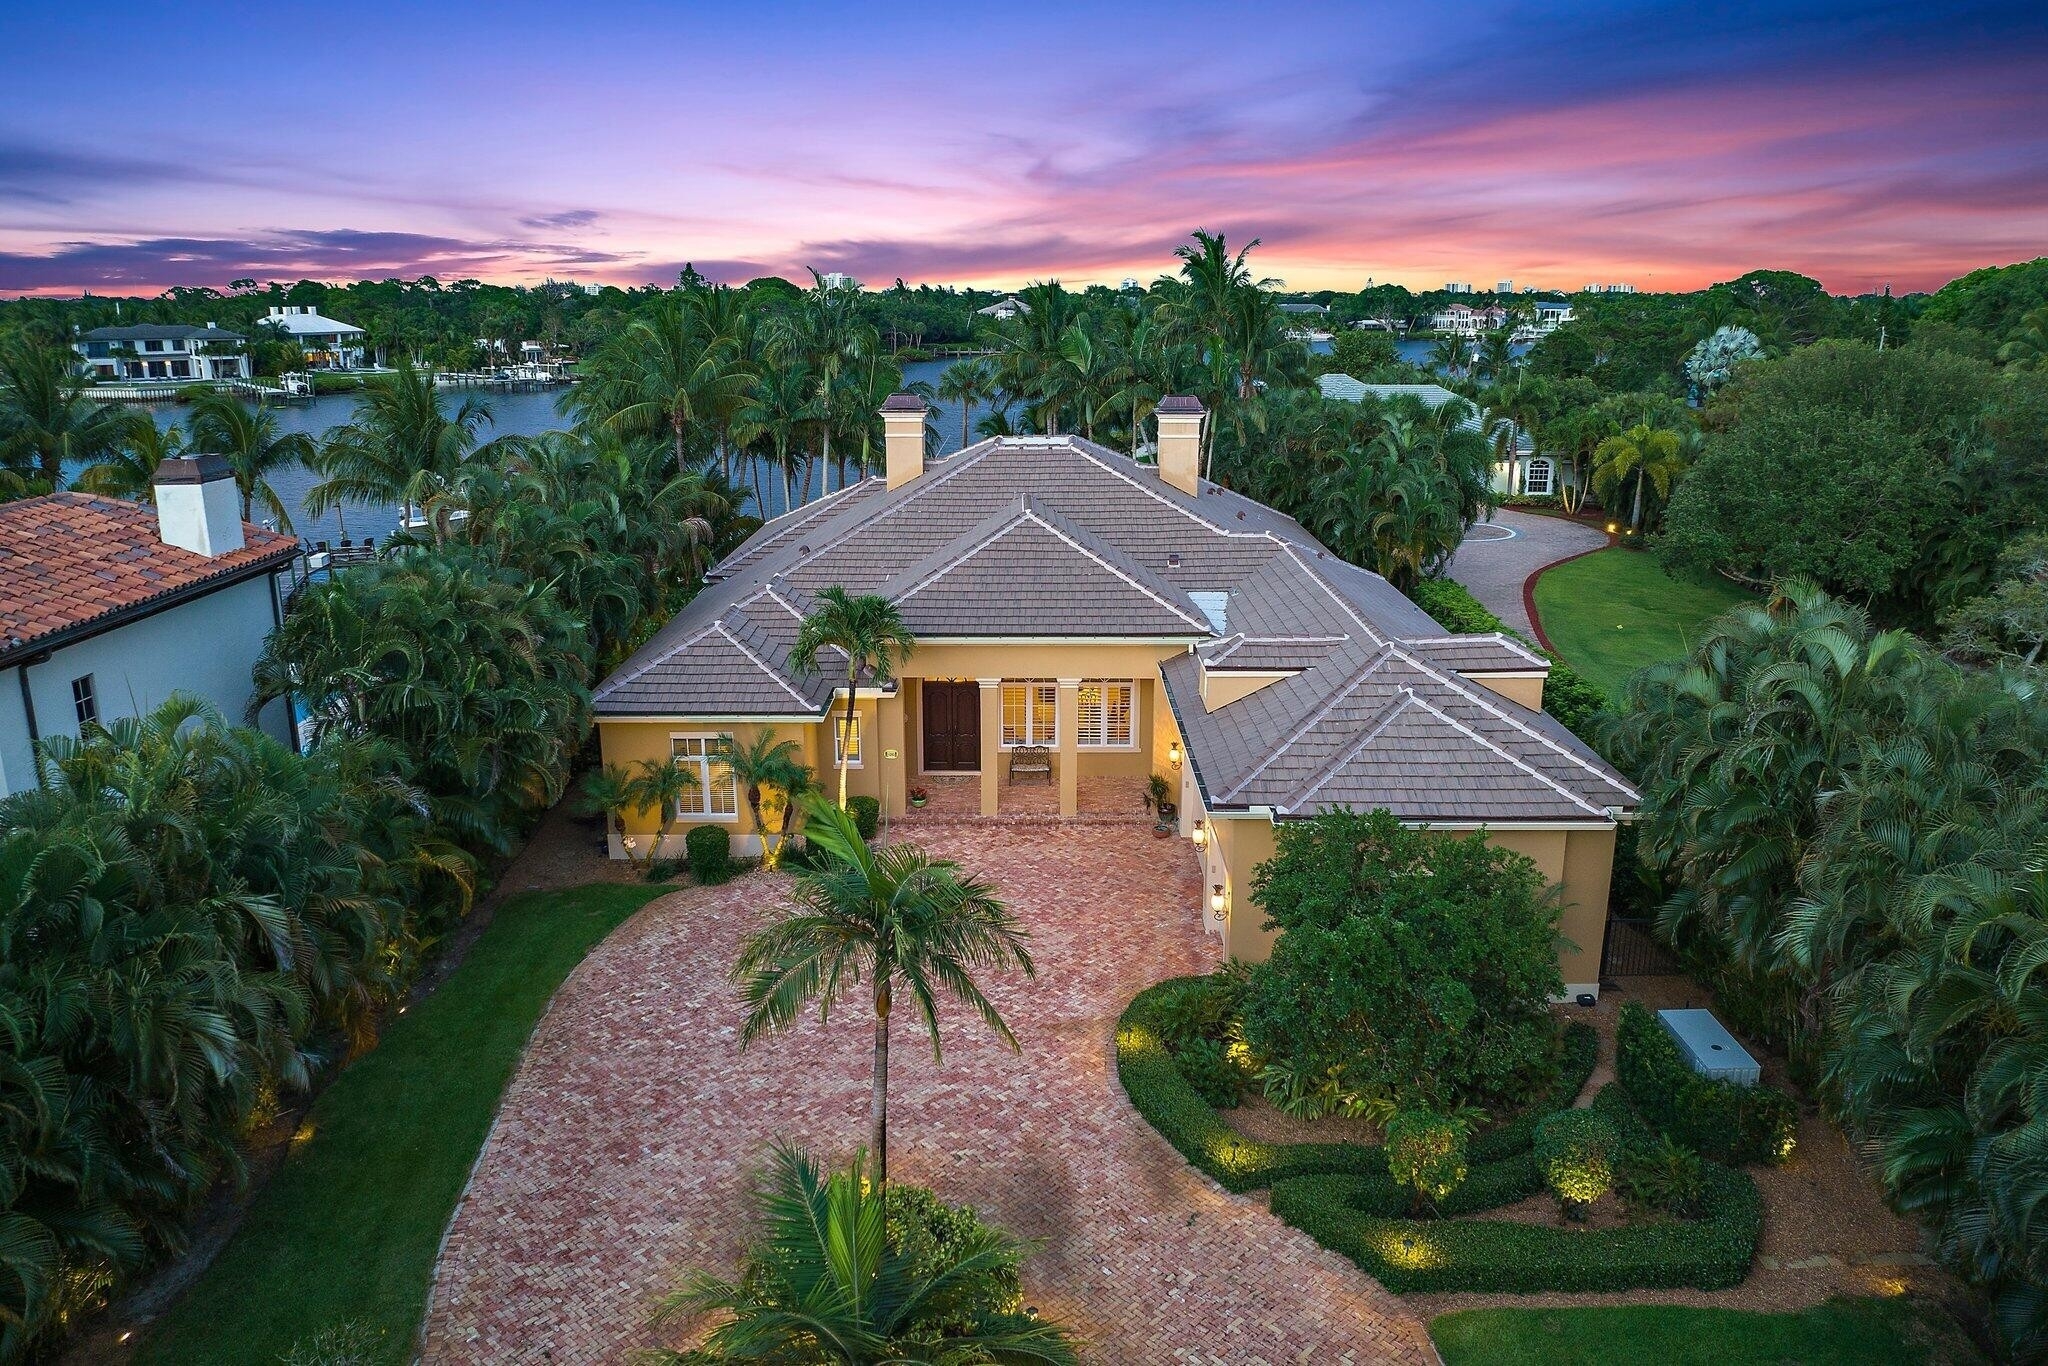 Single Family Home at Tequesta